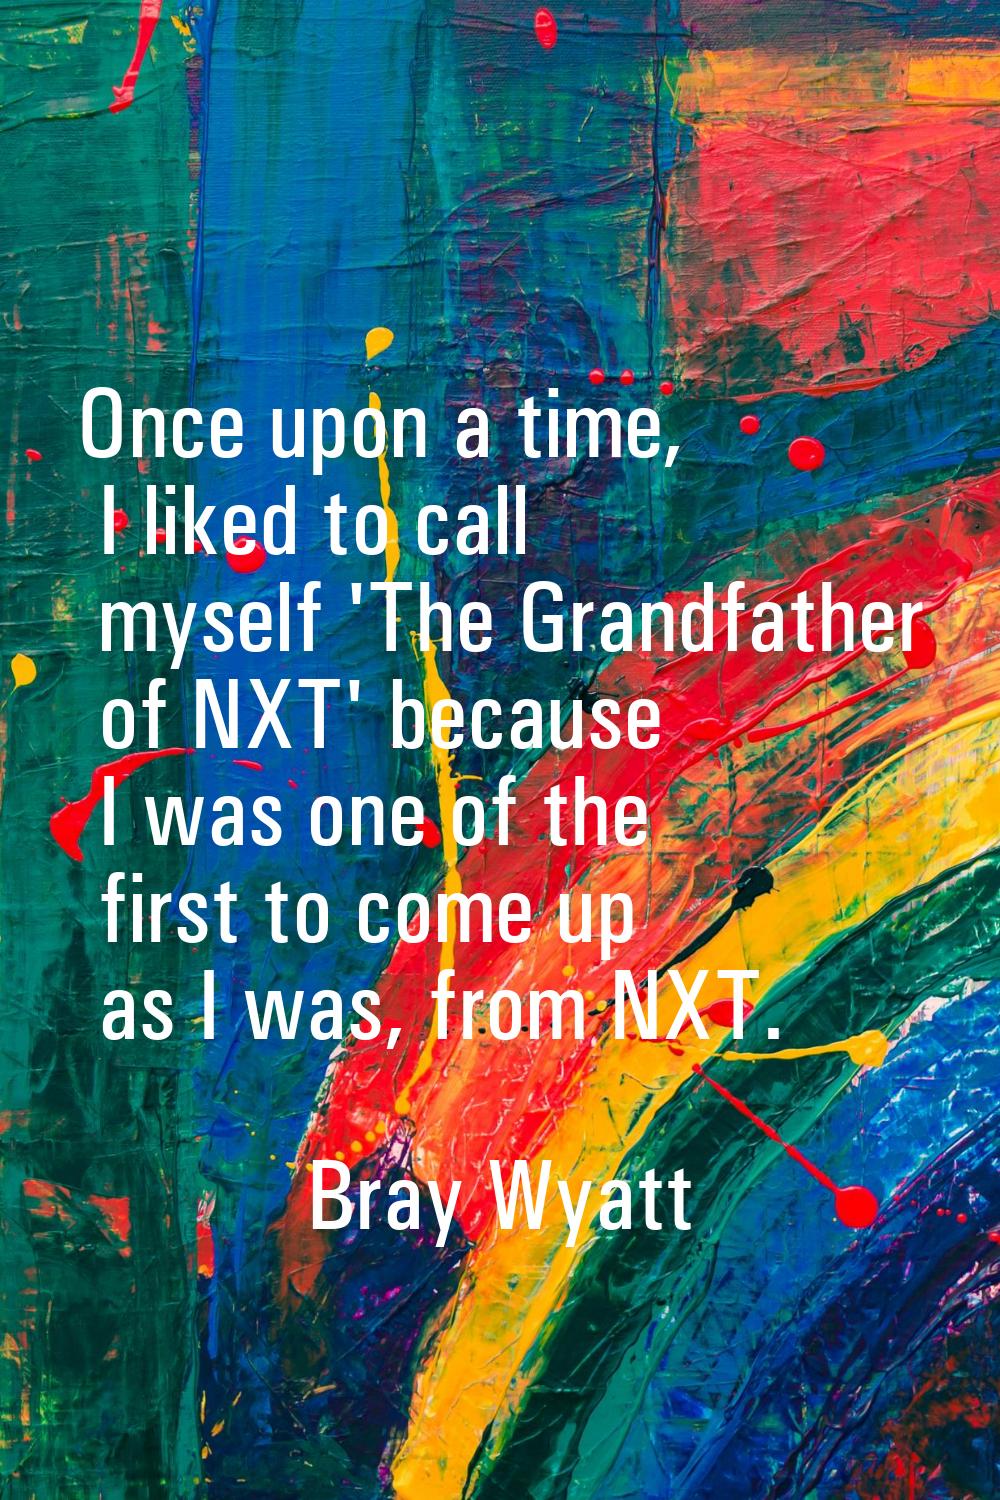 Once upon a time, I liked to call myself 'The Grandfather of NXT' because I was one of the first to